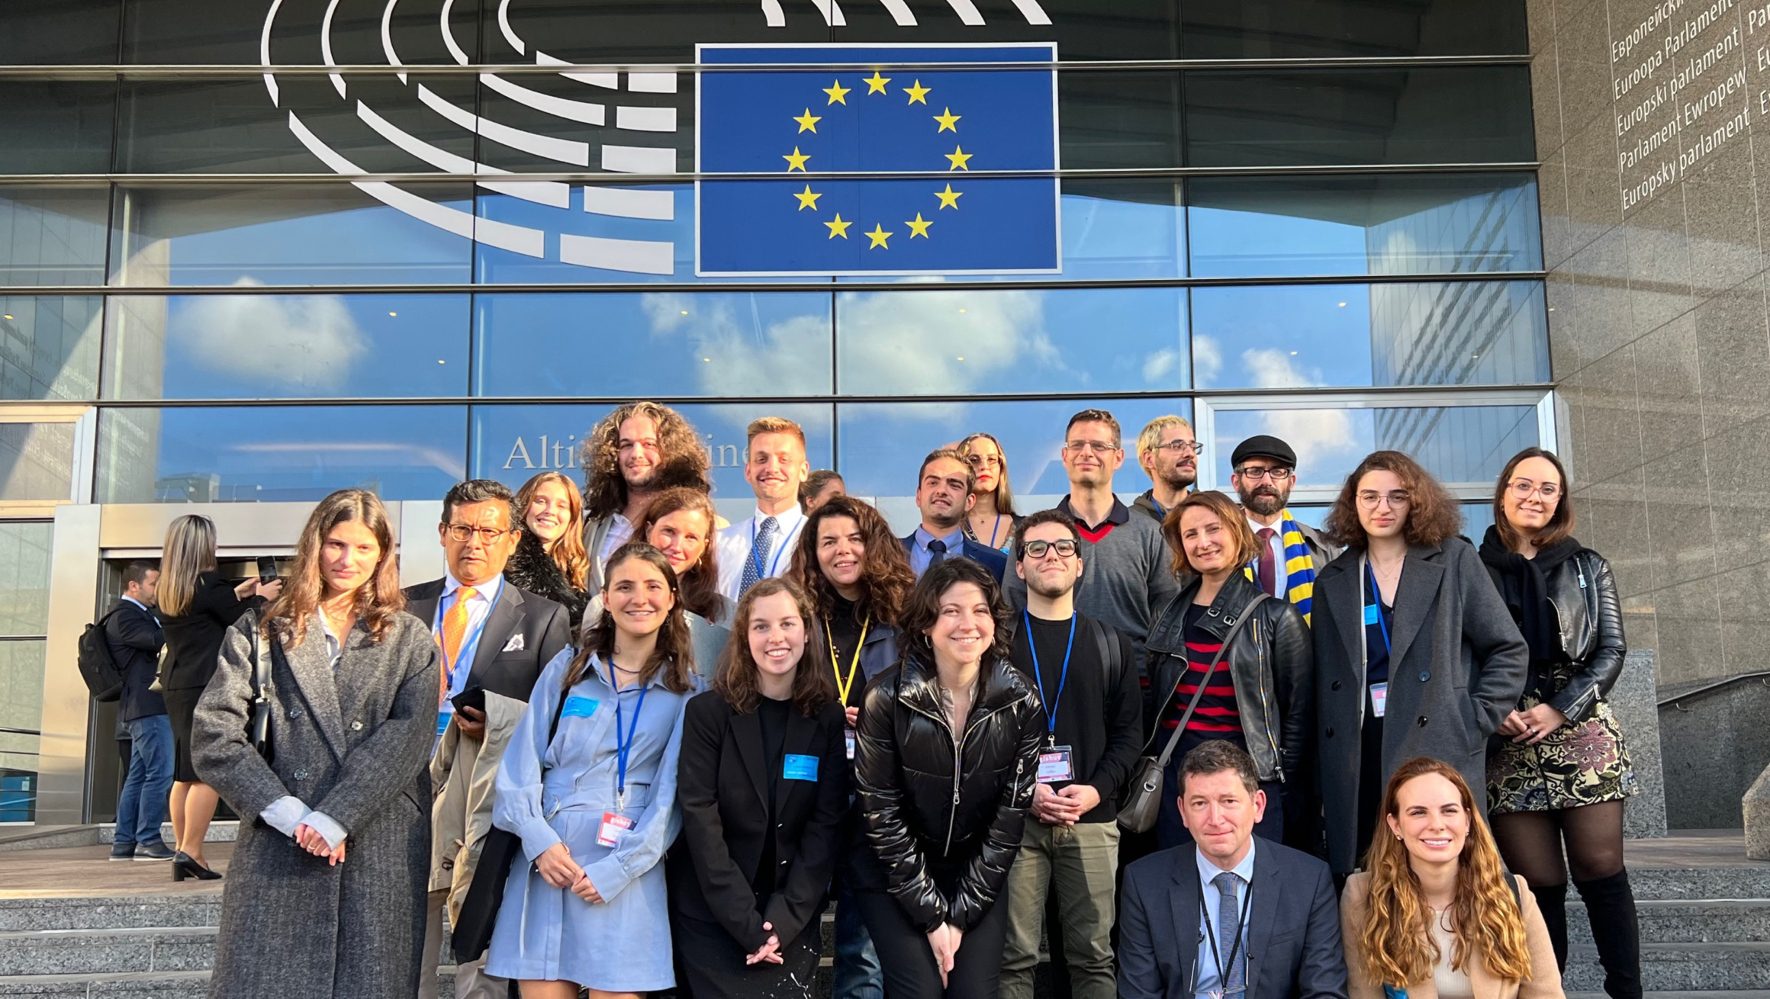 Conference participants pose in Brussels.